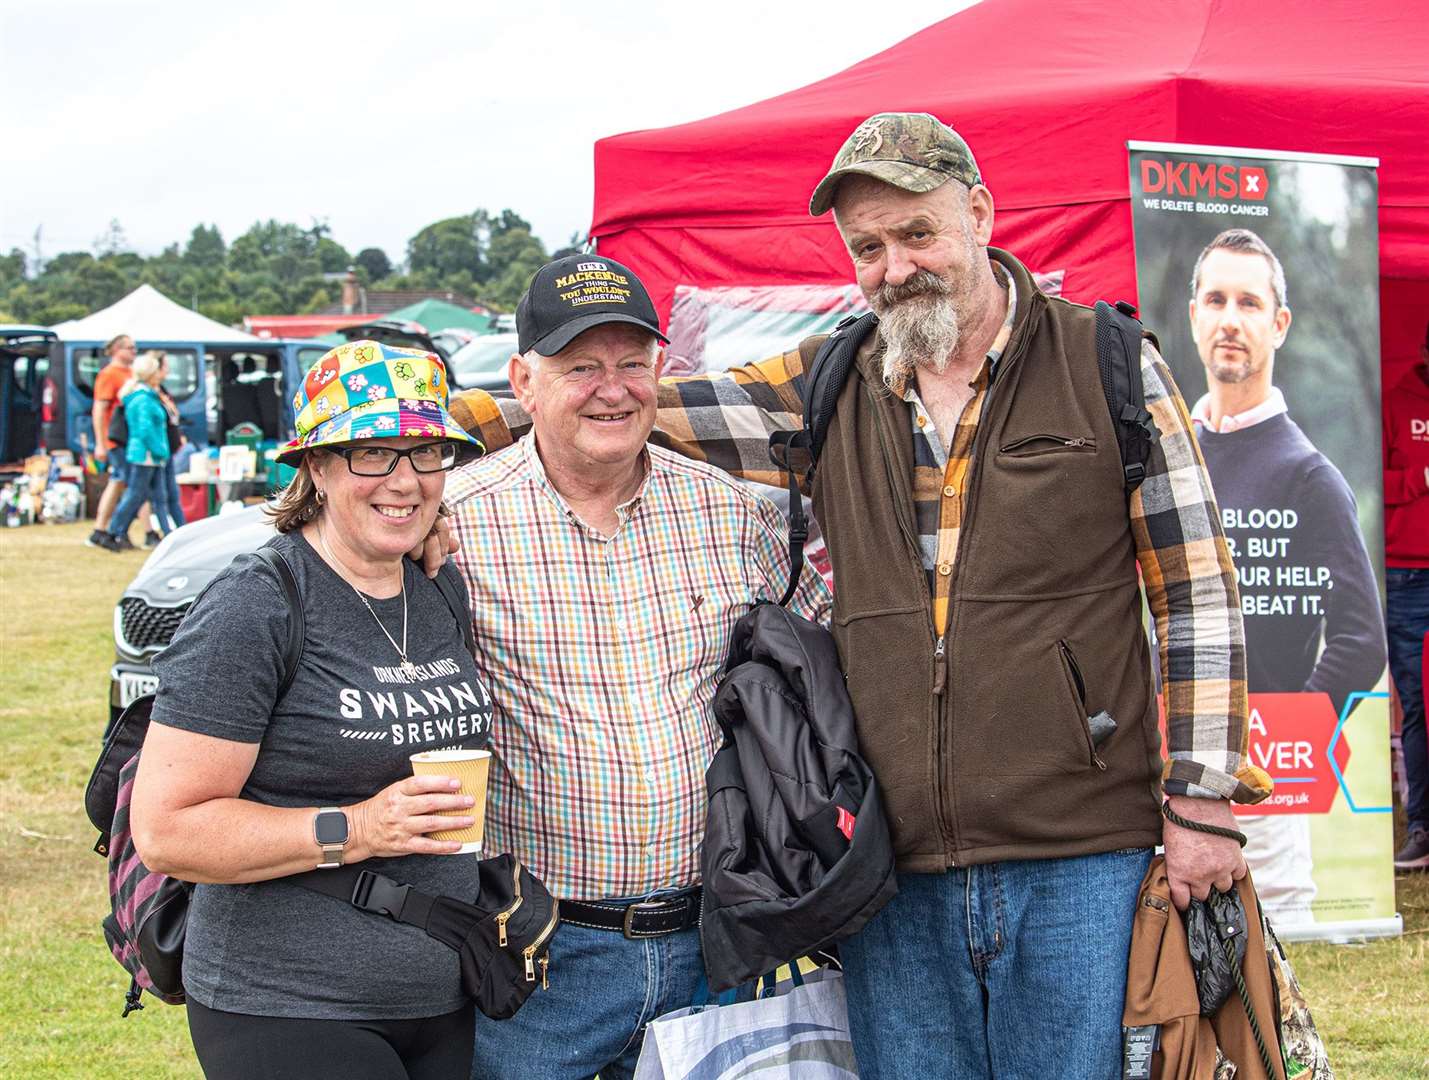 All smiles at this year's Truckness event. Photo: Niall Harkiss